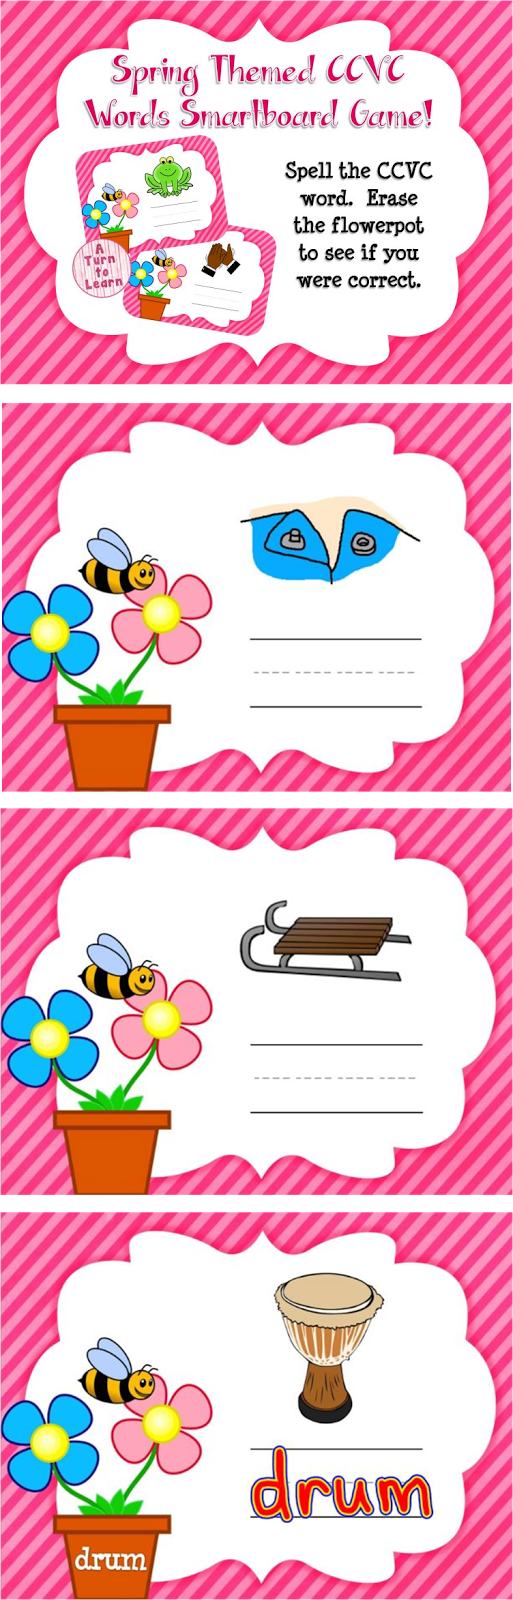 Spring Themed CCVC Words for Smartboard or Promethean Board!